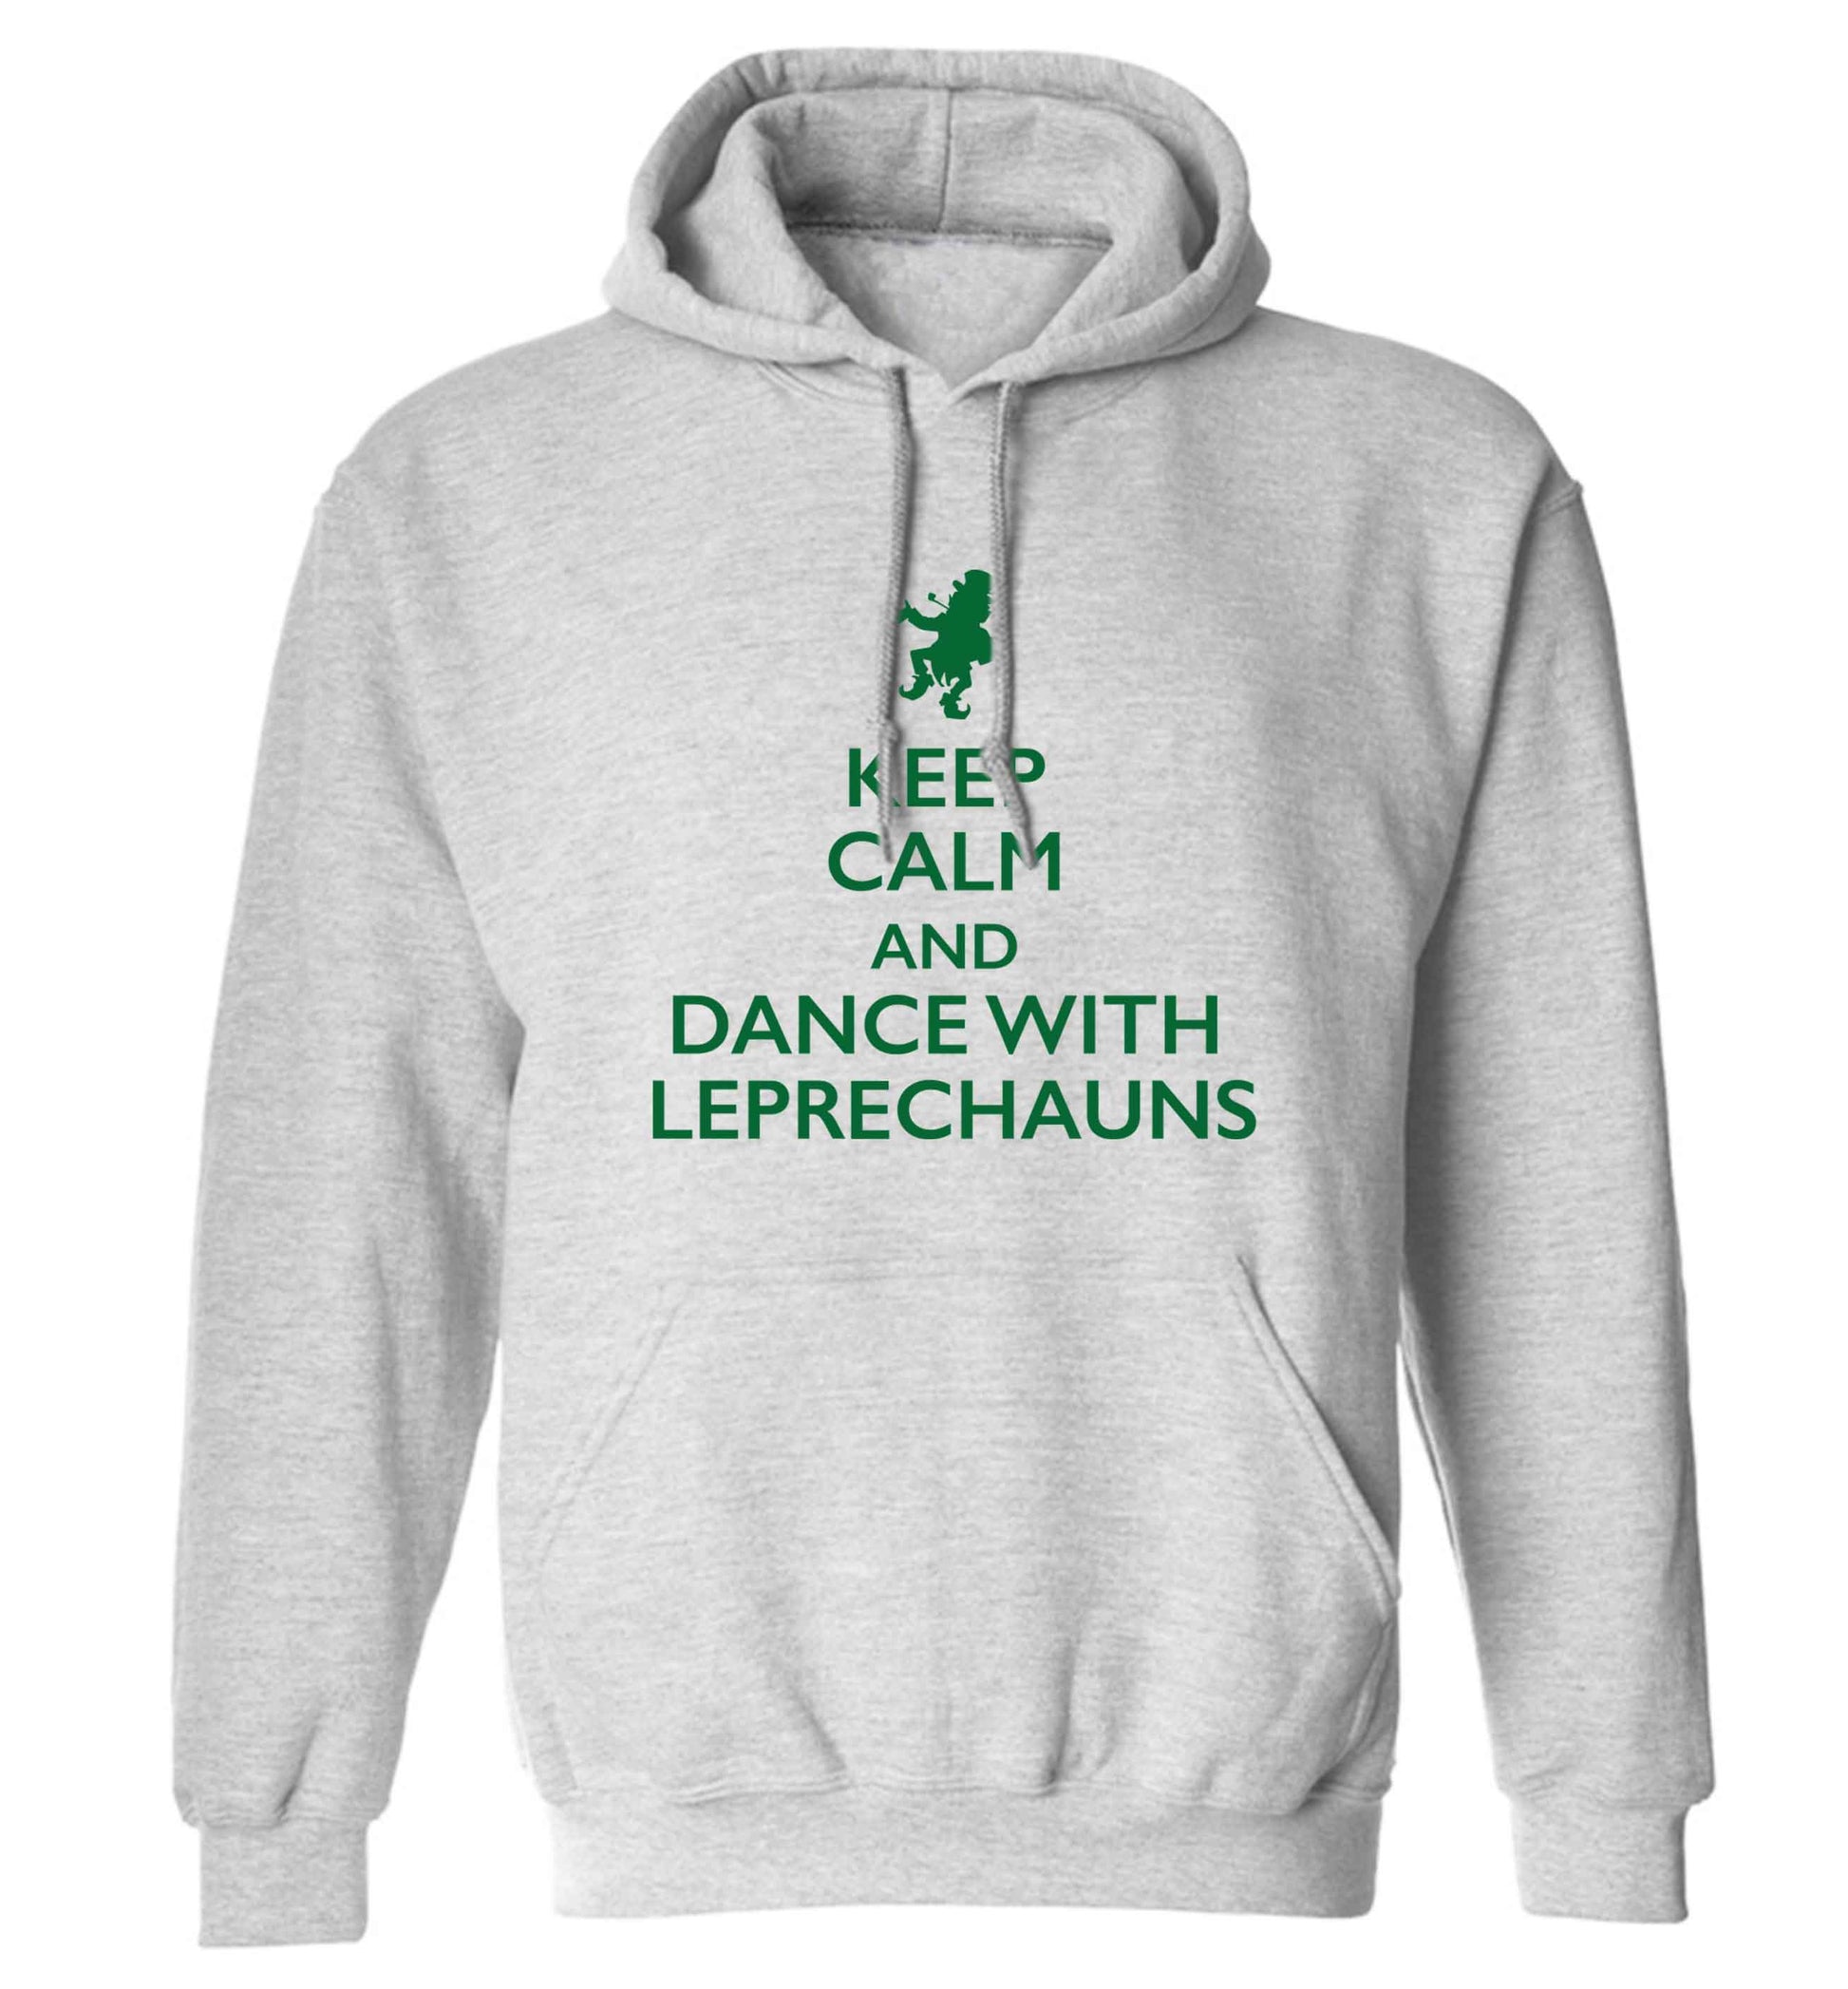 Keep calm and dance with leprechauns adults unisex grey hoodie 2XL